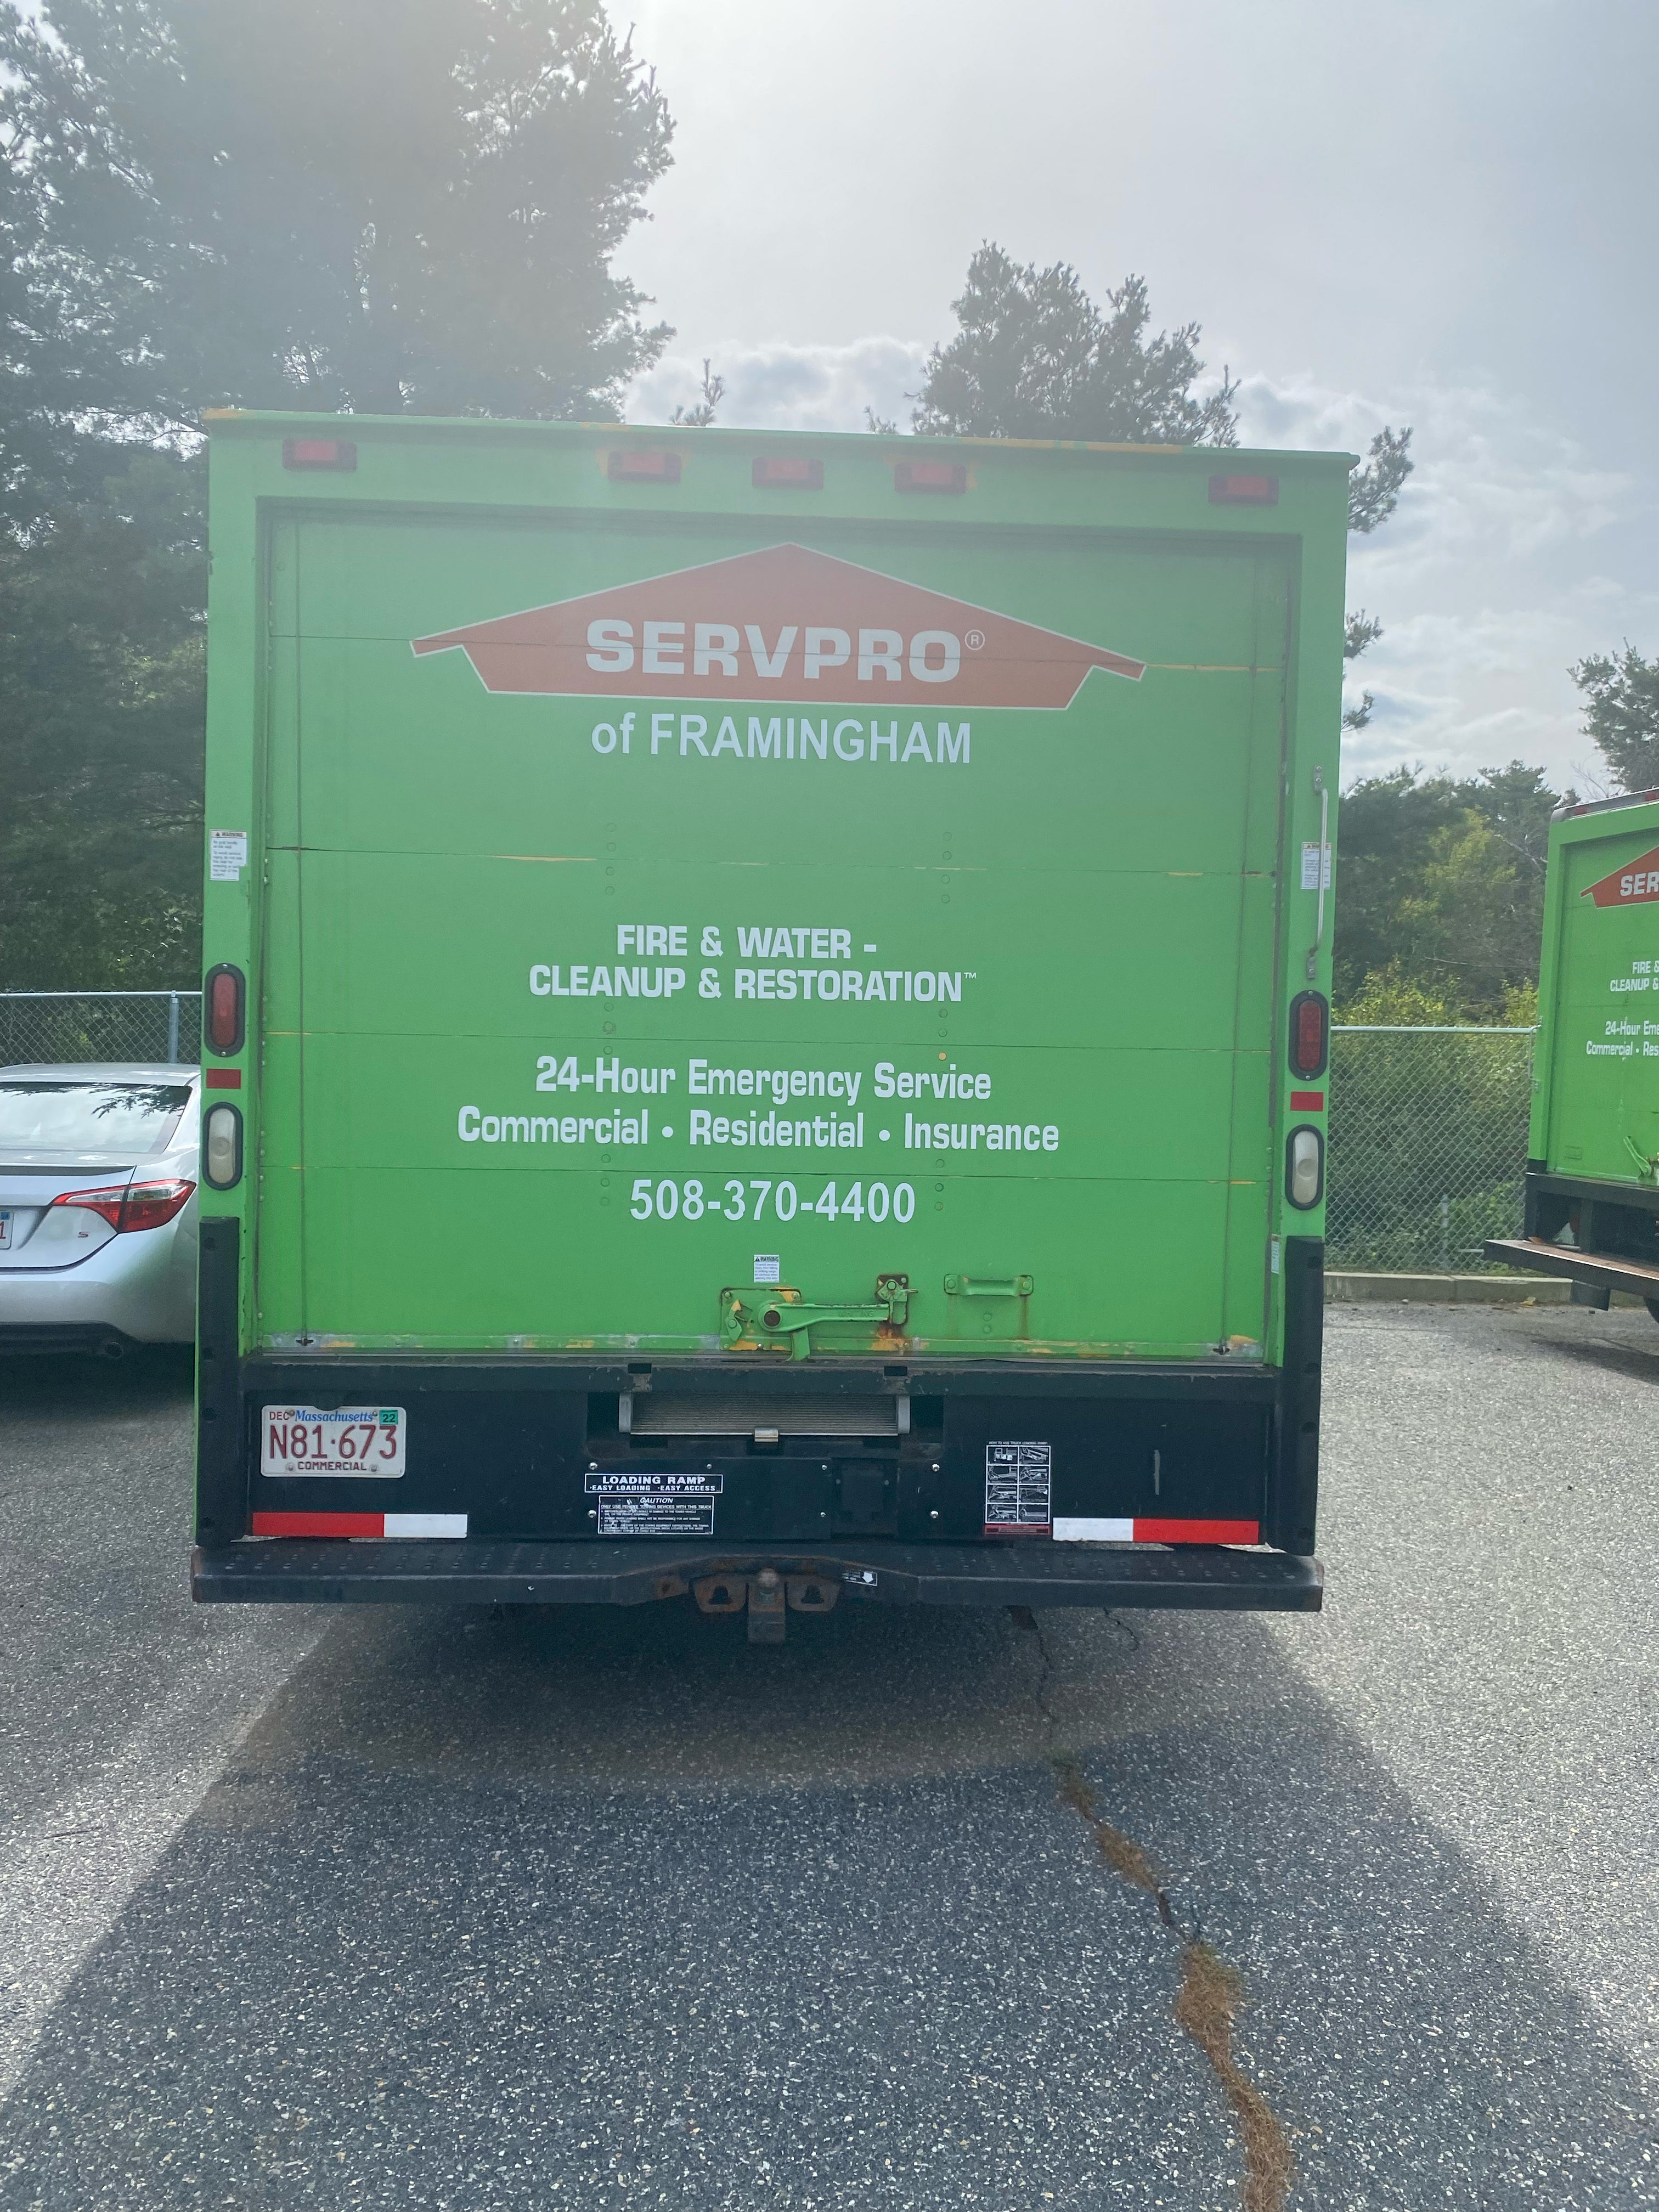 Both the Disaster Remediation and Rebuild Teams of SERVPRO of Natick/Milford are highly skilled and professional. Our certified technicians and licensed contractors will be there for you throughout the entire project life-cycle.  They will collaborate with you, keep you informed and make sure that your expectations are met. There is no need to manage multiple contractors, timelines, or invoices. SERVPRO of Natick/Milford is your one-stop remediation to rebuild shop. We will make it 